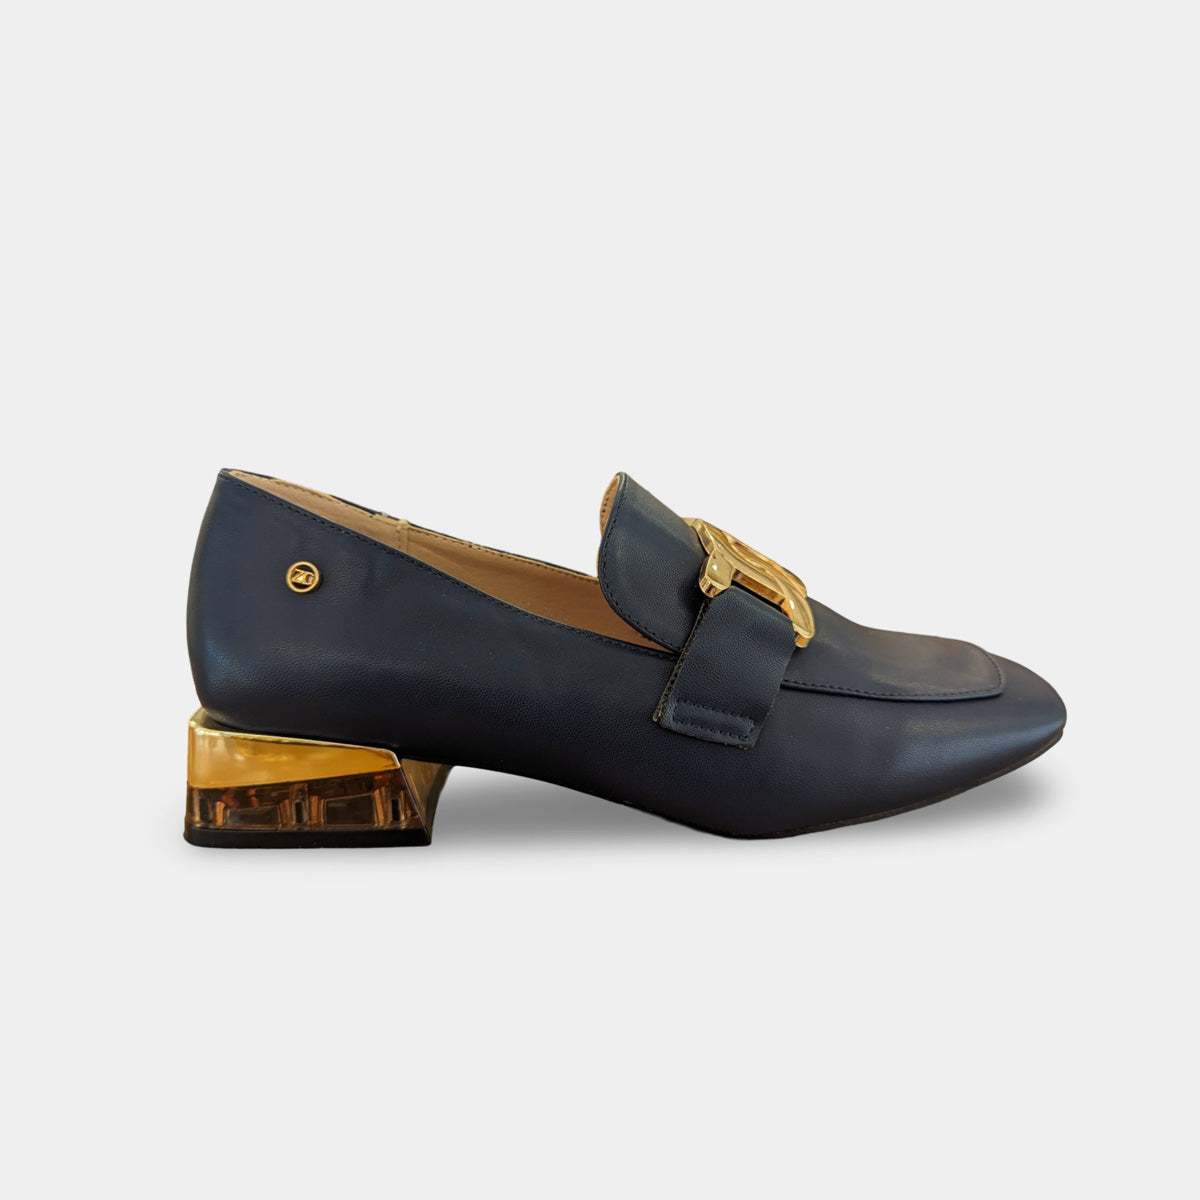 Detailed view of the navy loafer's elegant upper with gold accents.